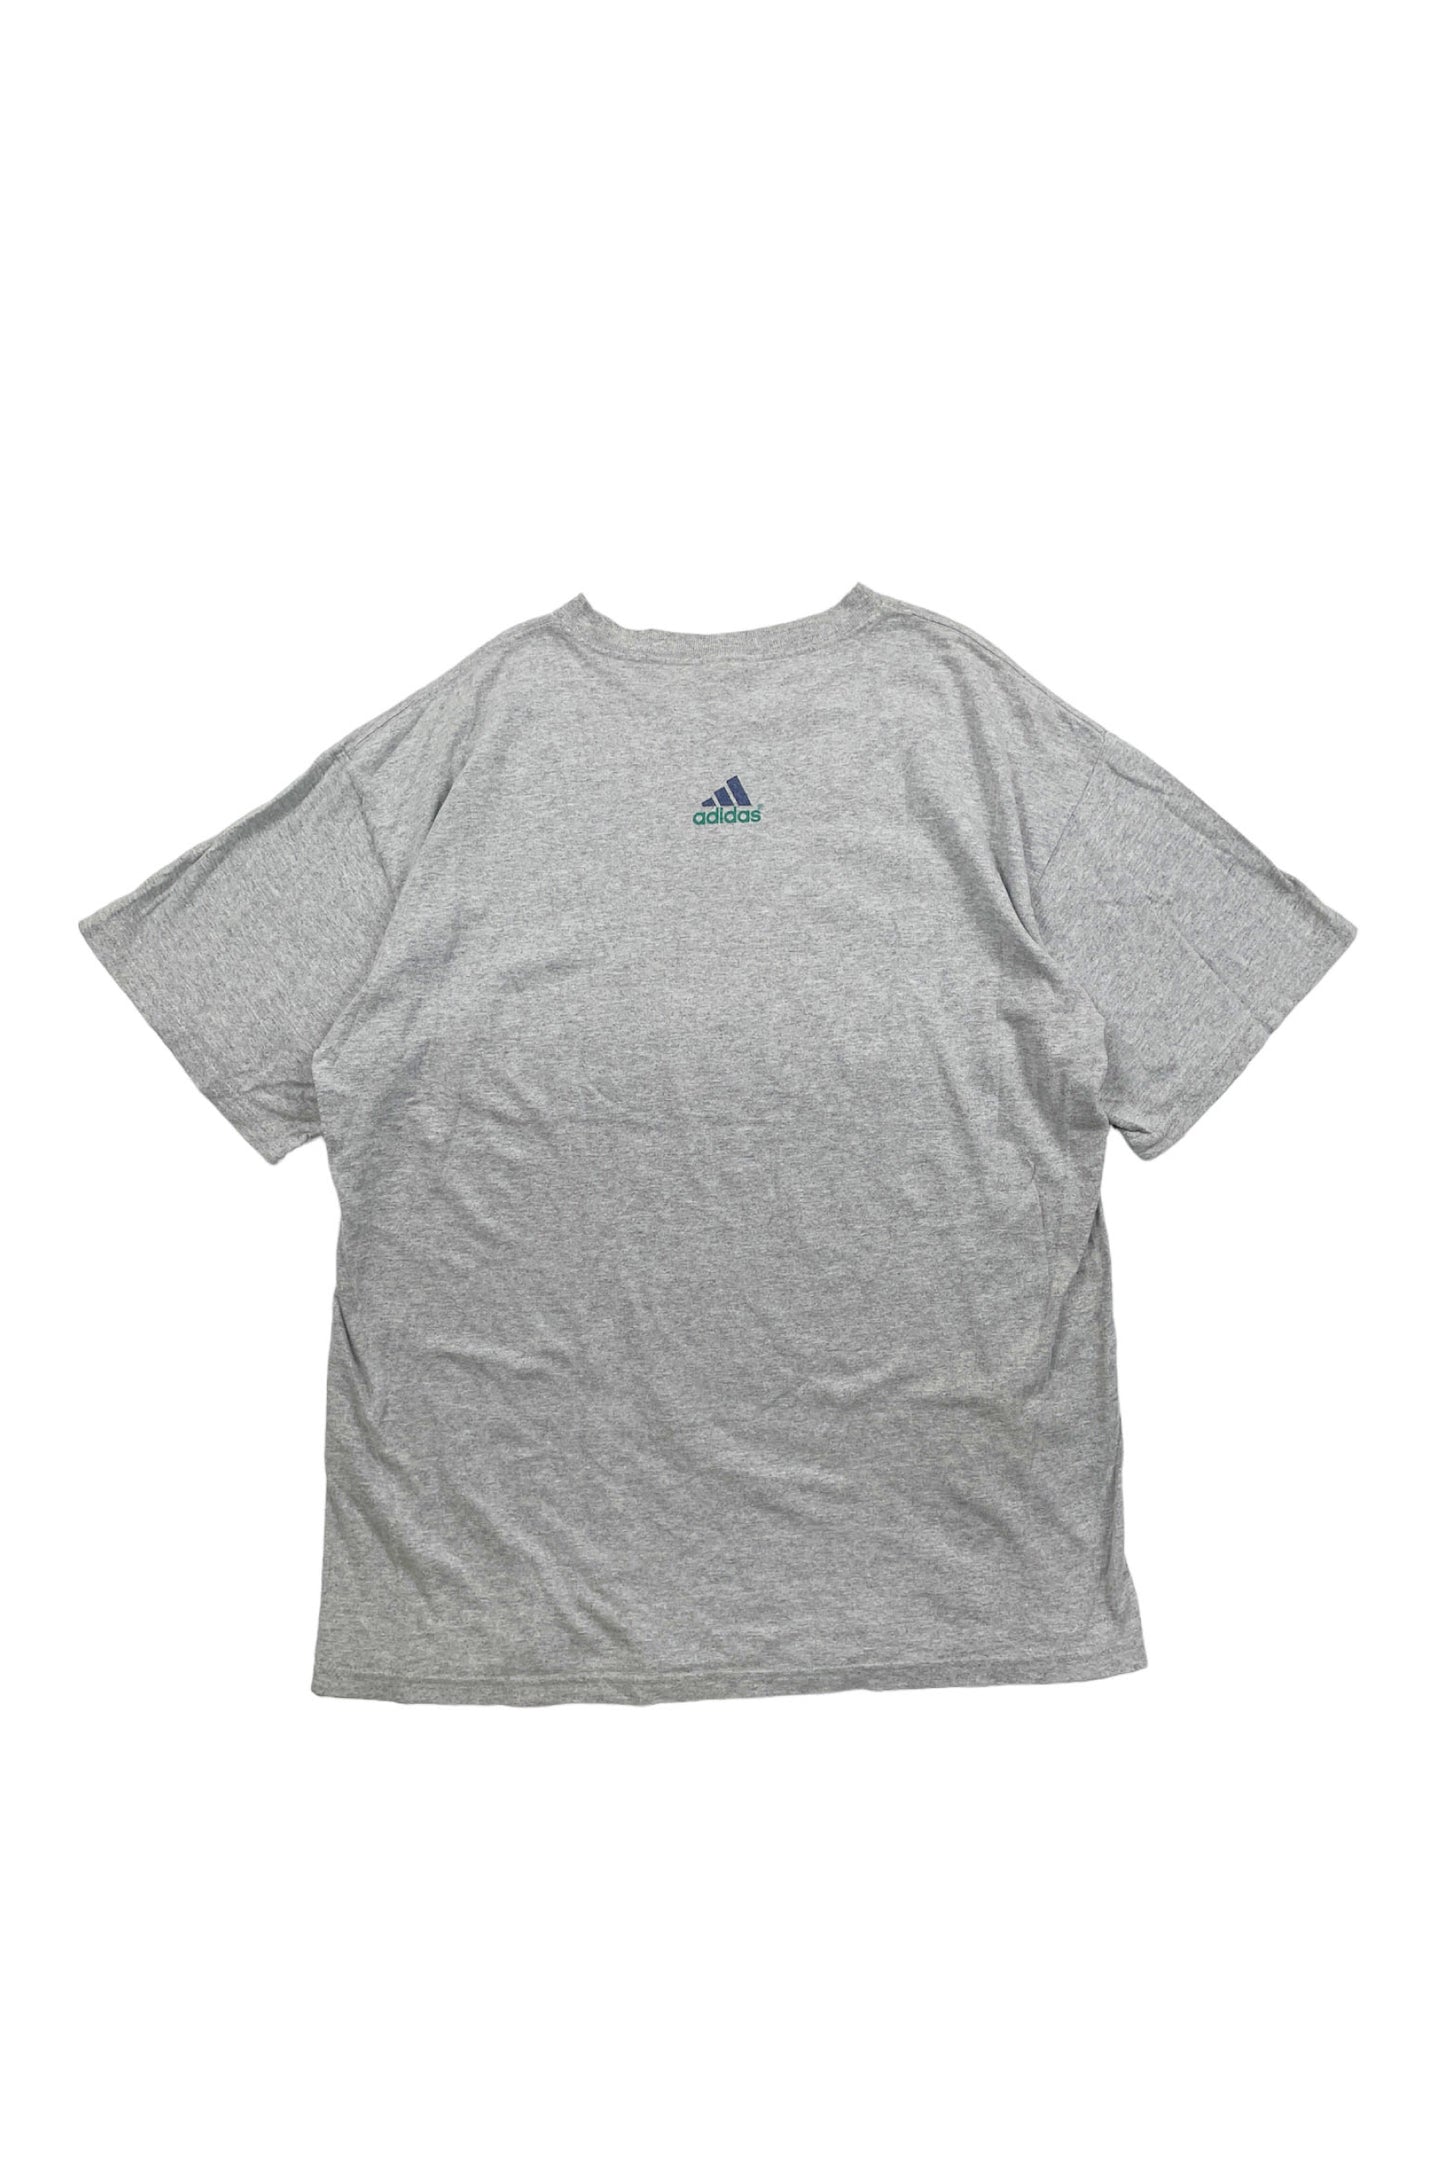 90's Made in USA adidas T-shirt